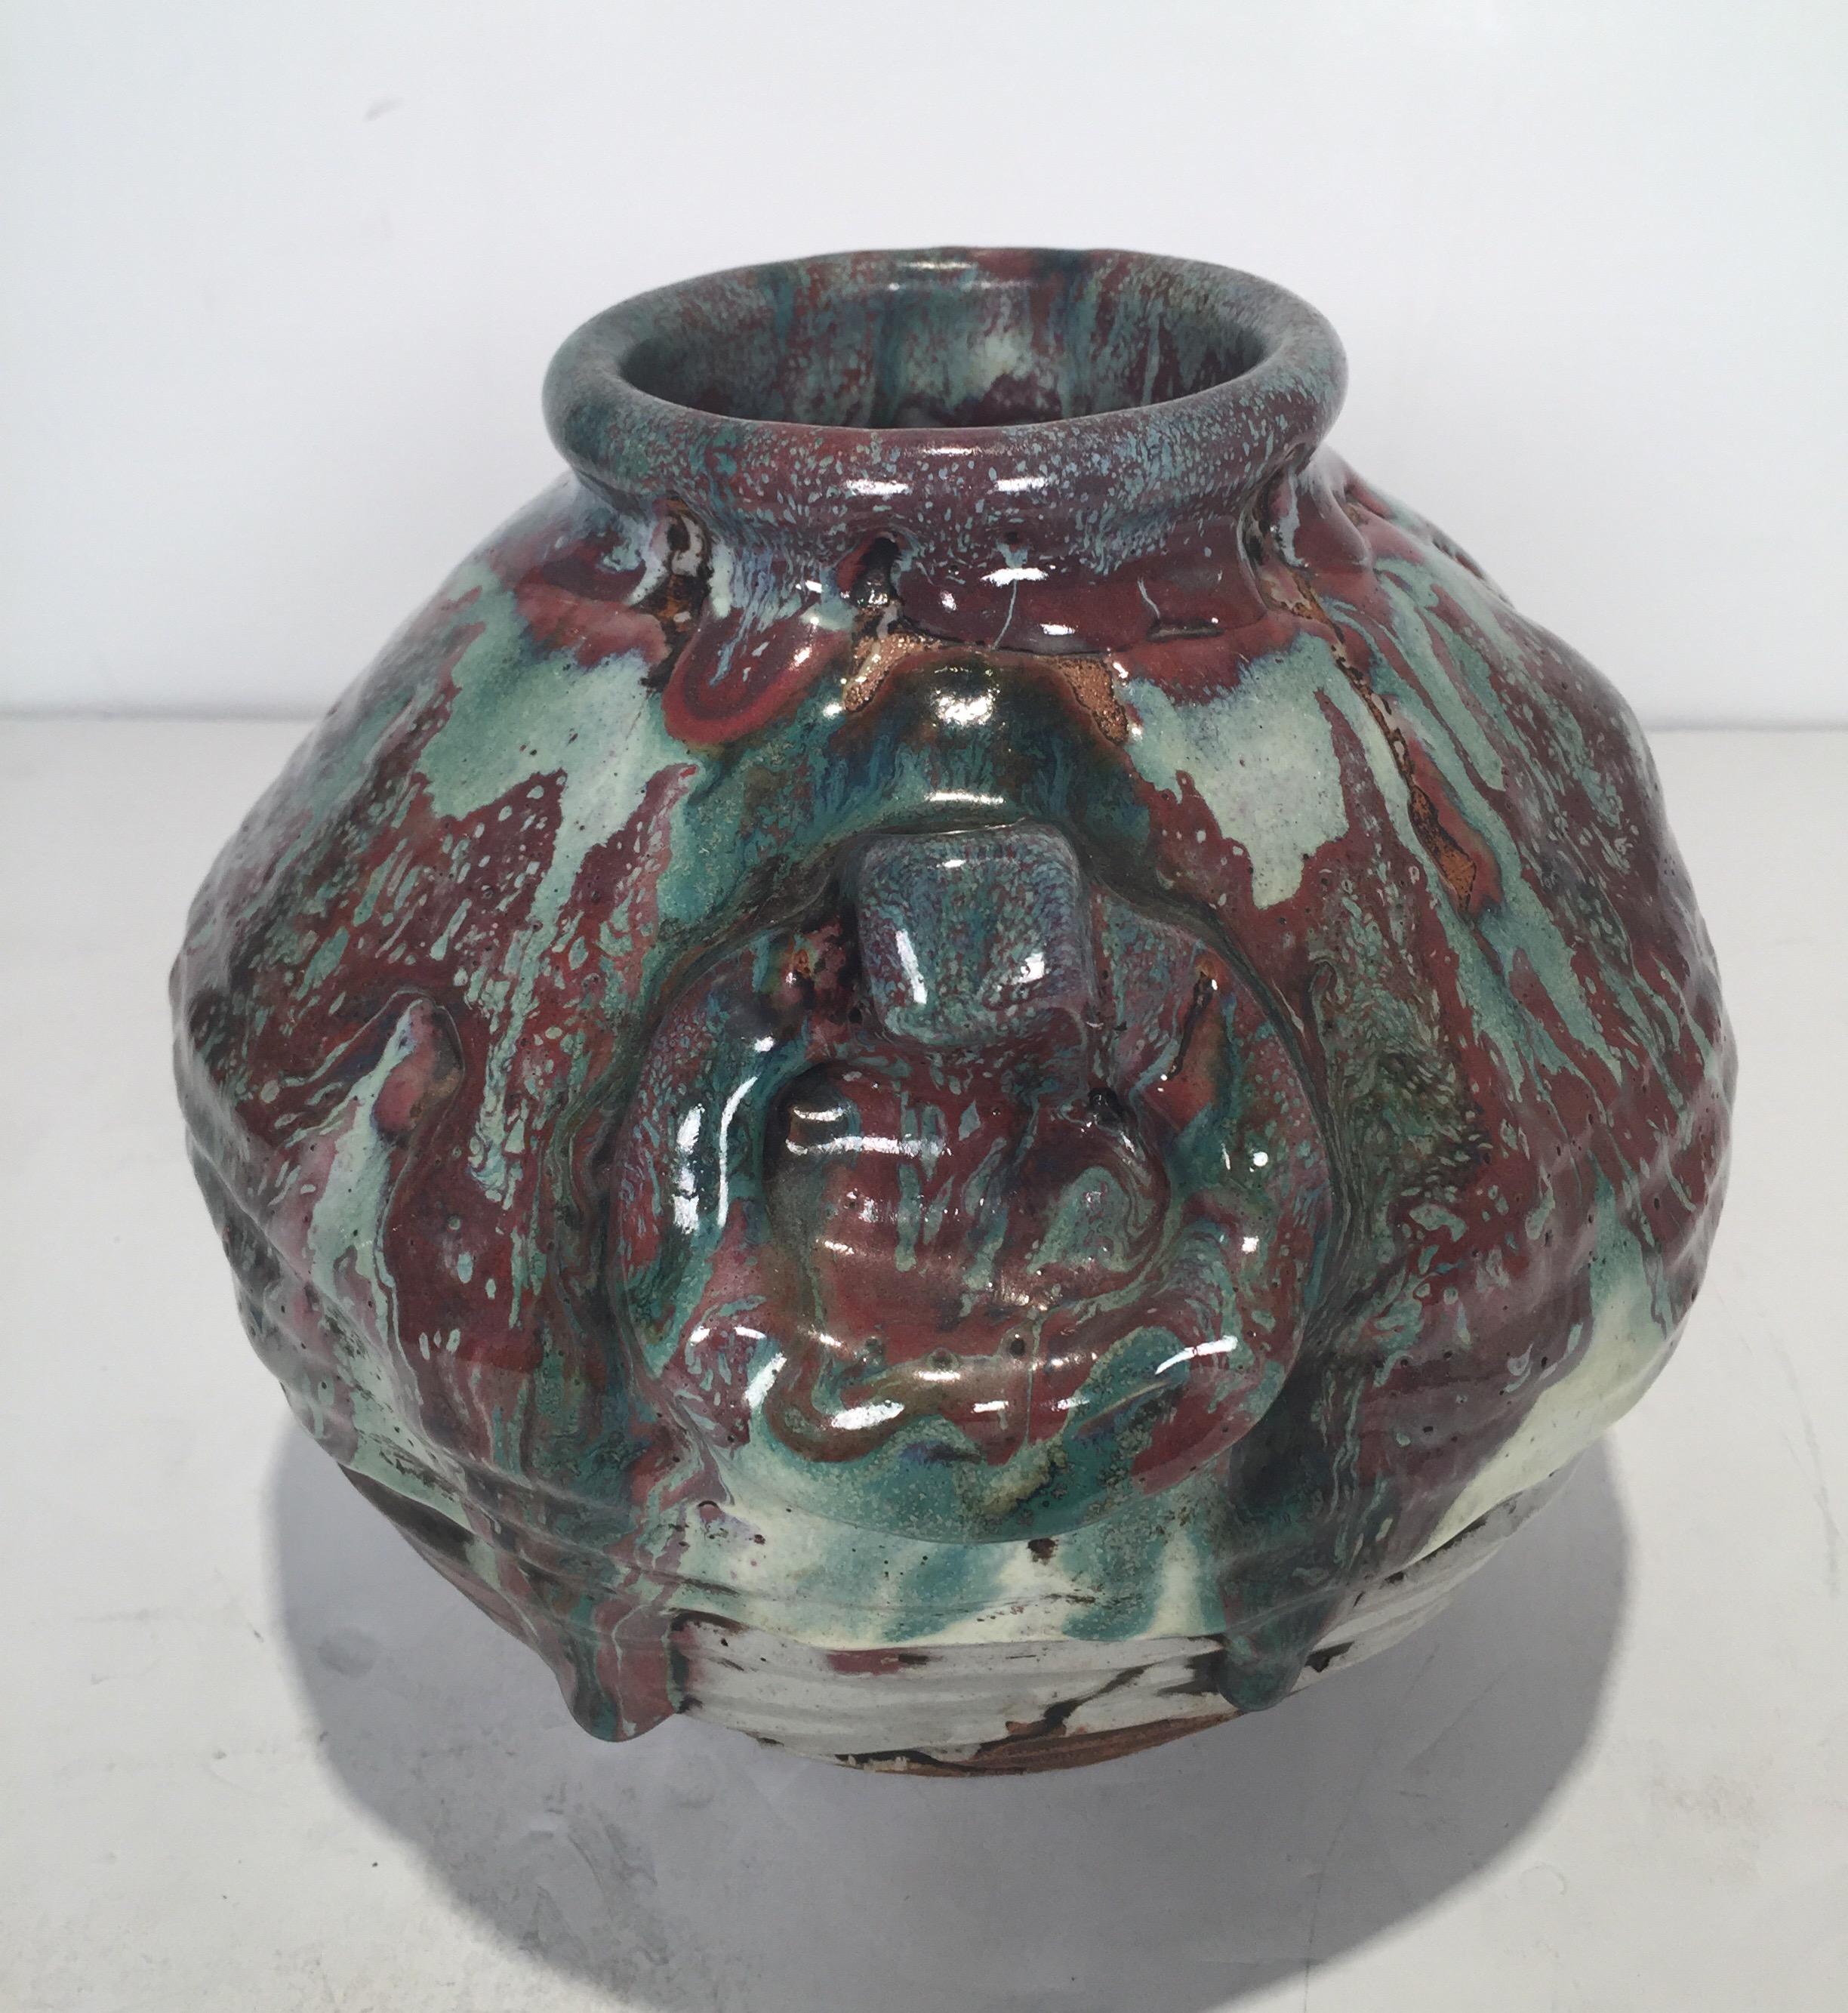 Early 20th century art pottery vase with a multicolored glaze. The bulbous body with molded ring handles and hick colored glaze with dripped design.